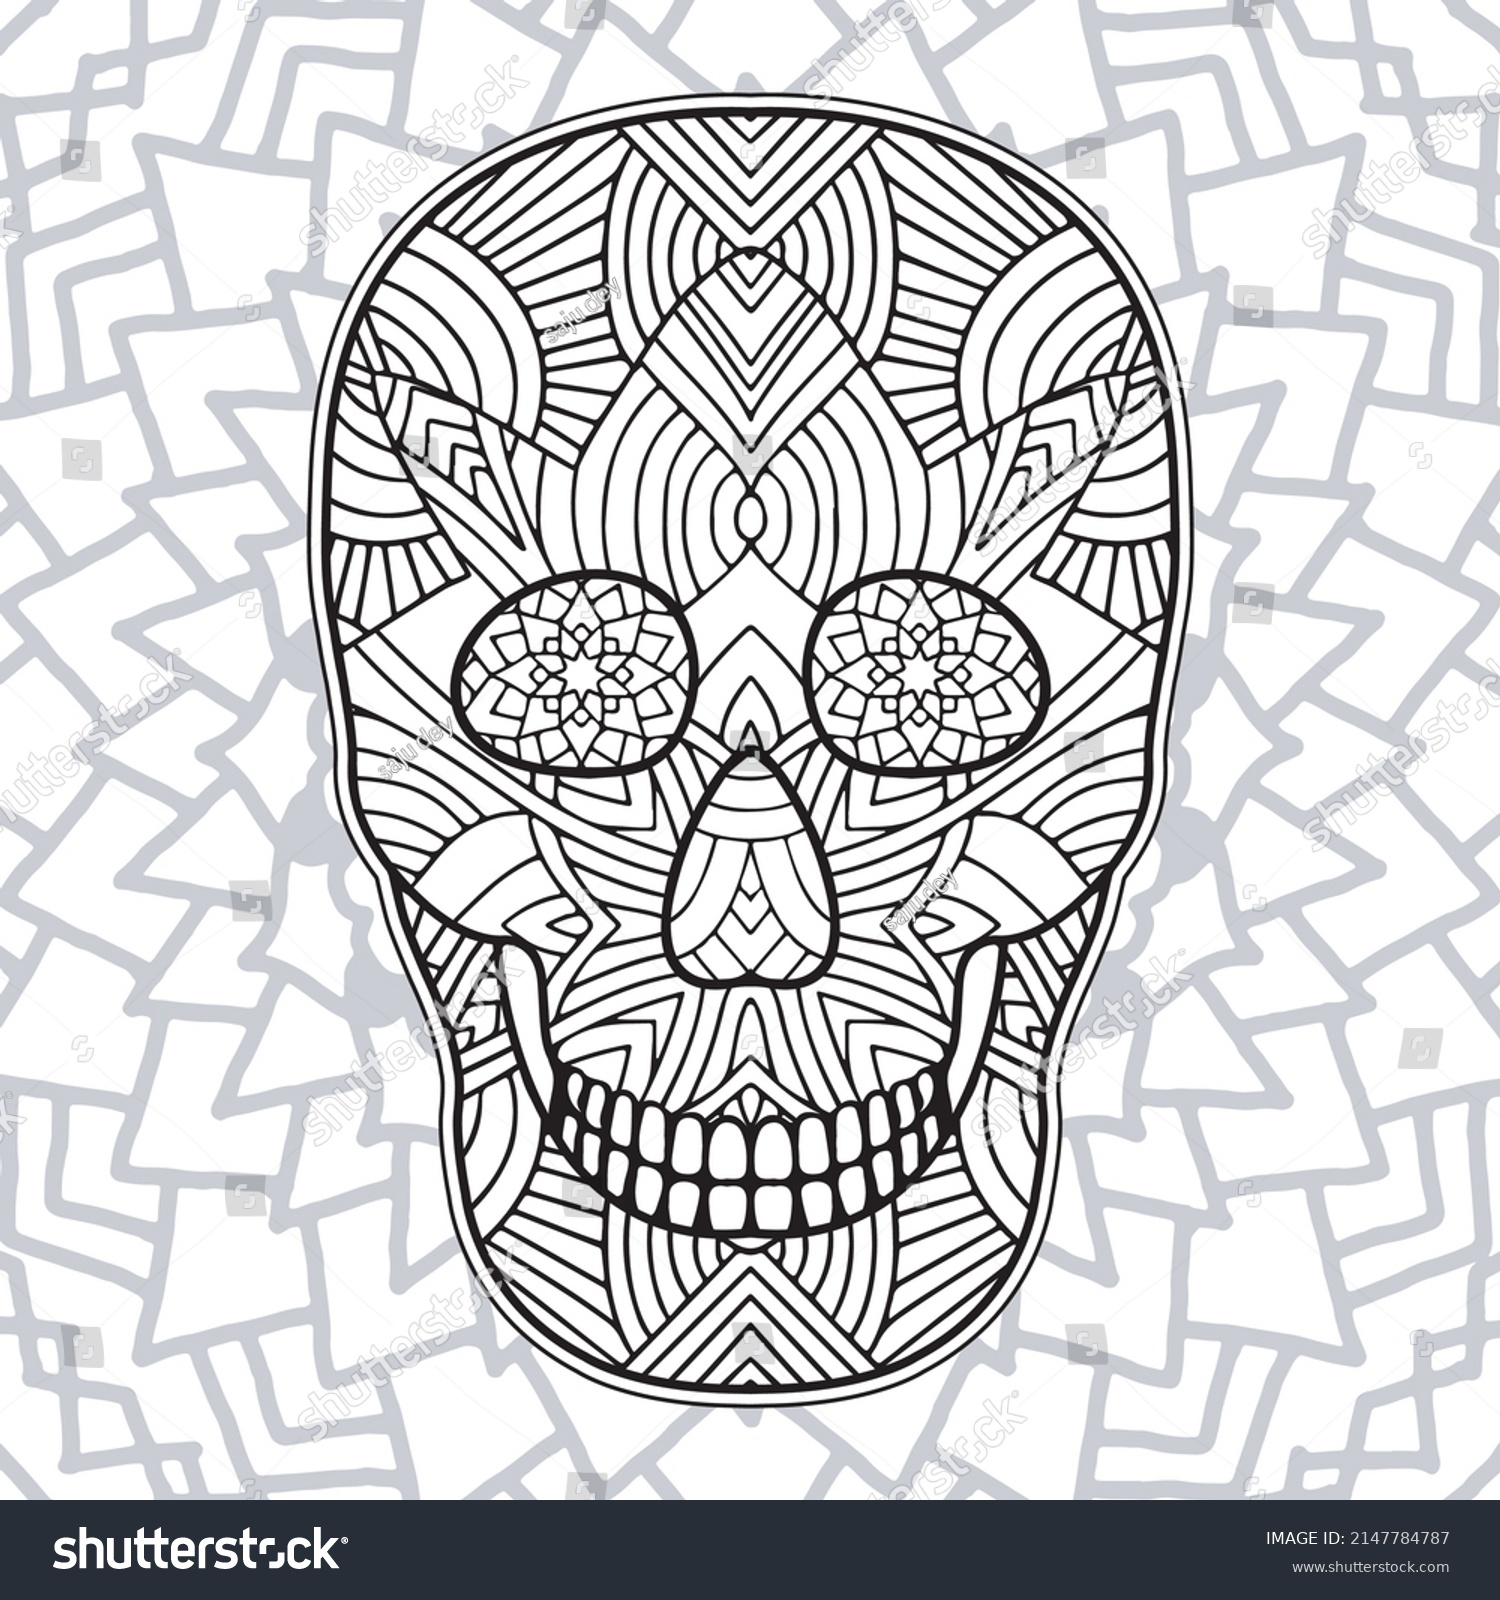 SVG of Day of the Dead Coloring for adult.
Mexican sugar skull, svg